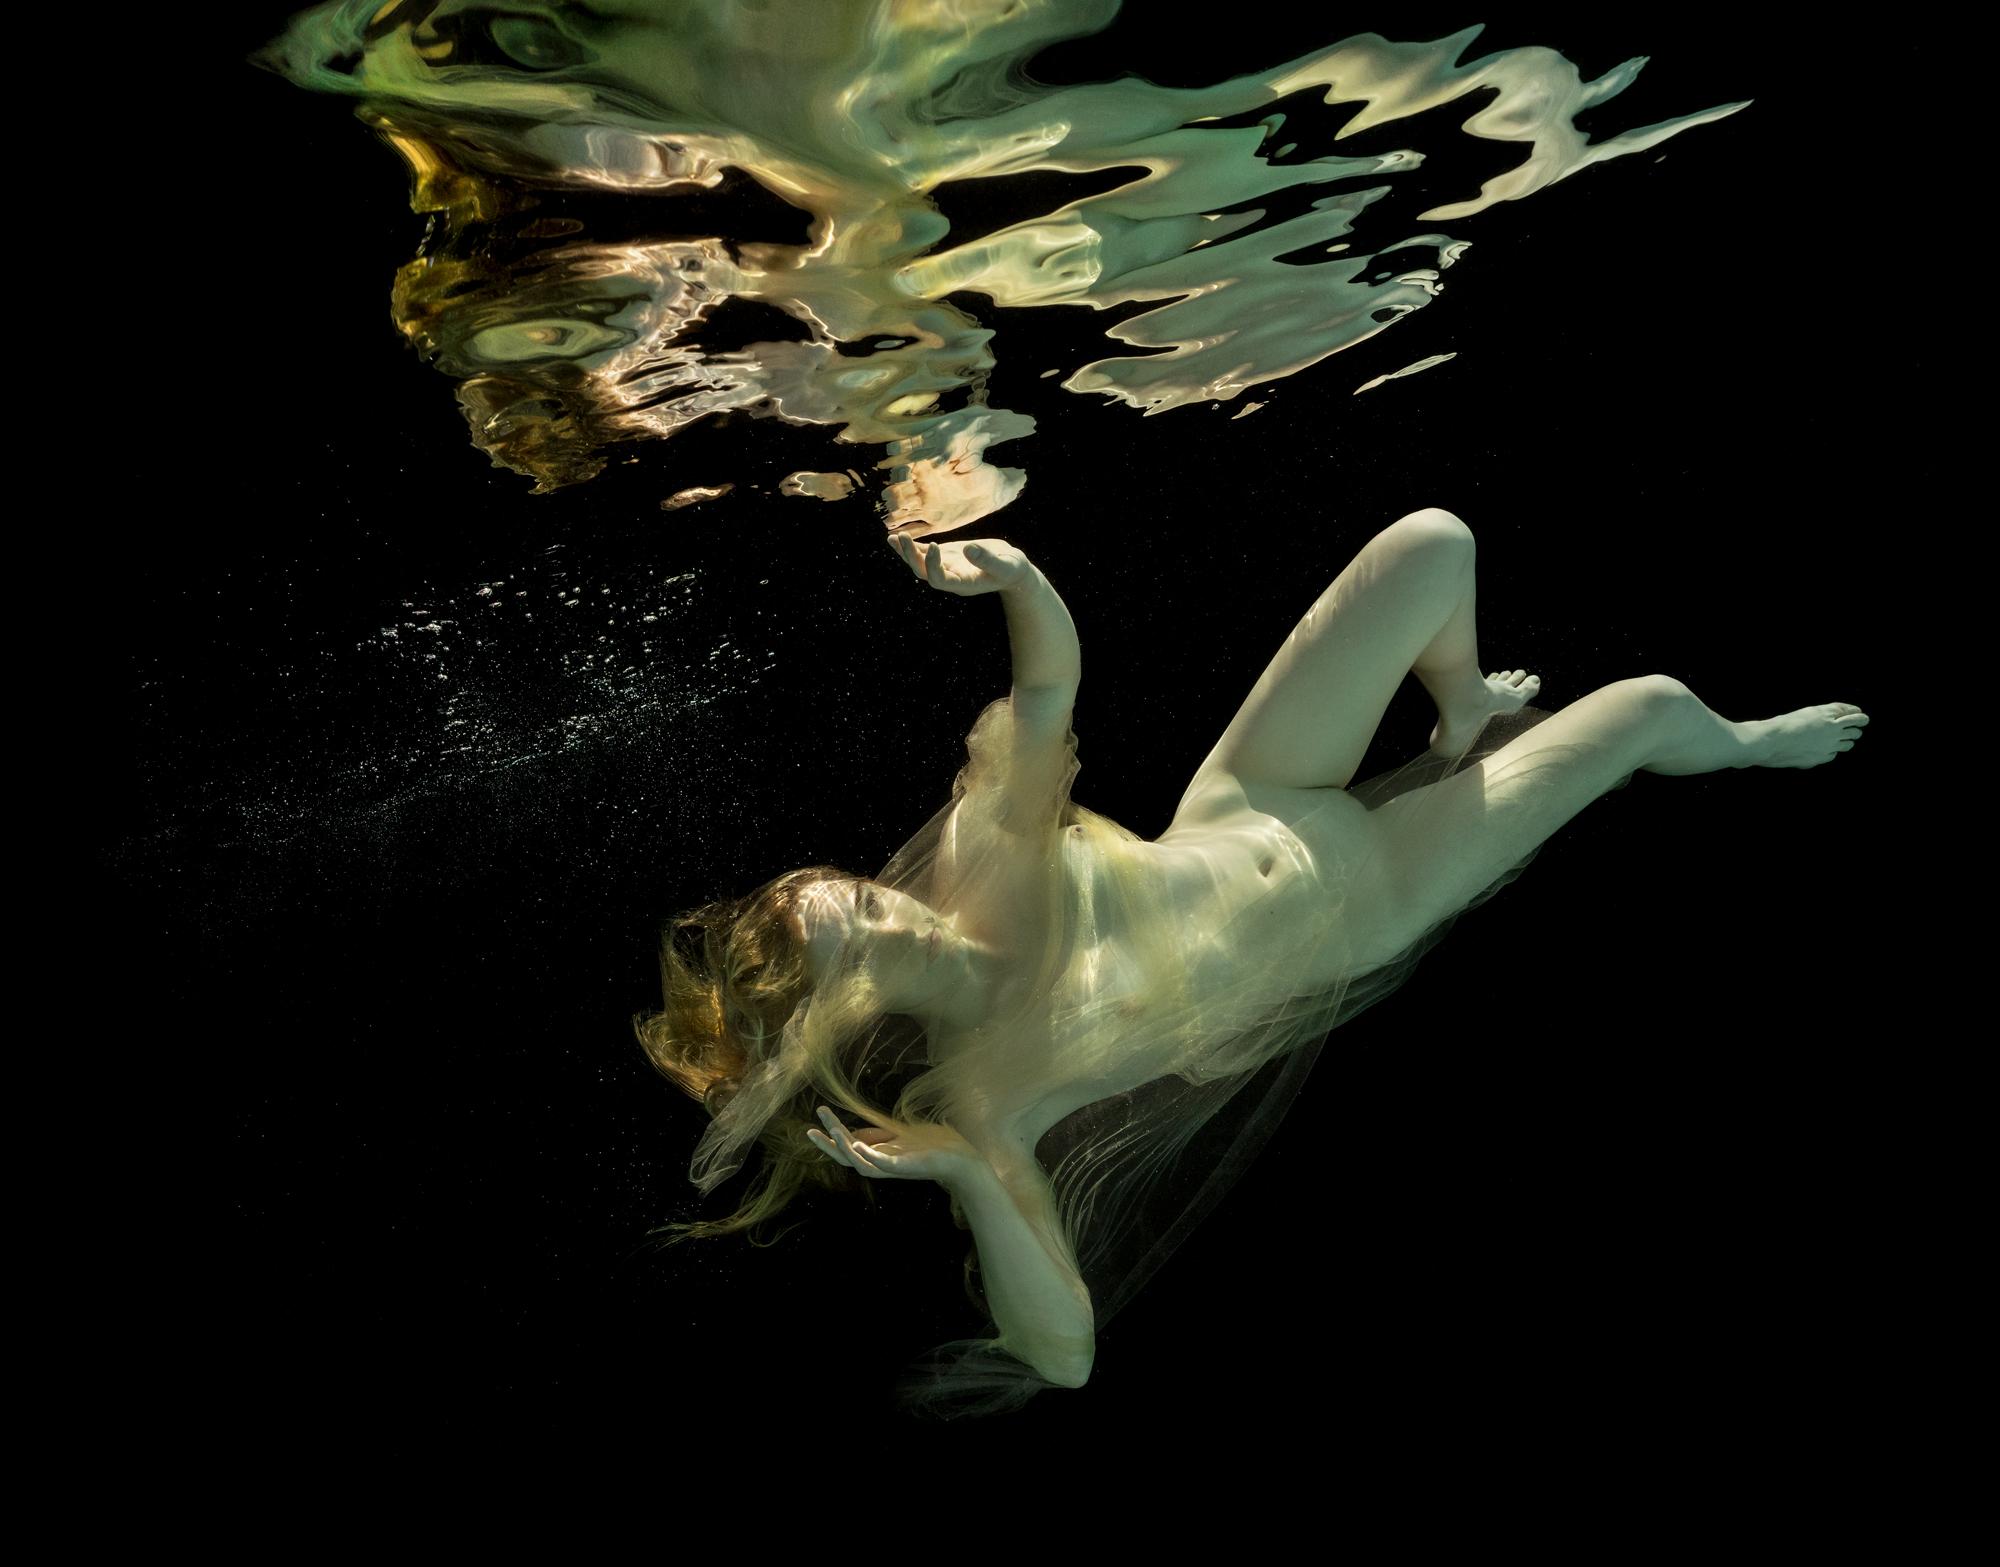 Danae and the Golden Rain - underwater nude photograph - print on paper 18” x 24